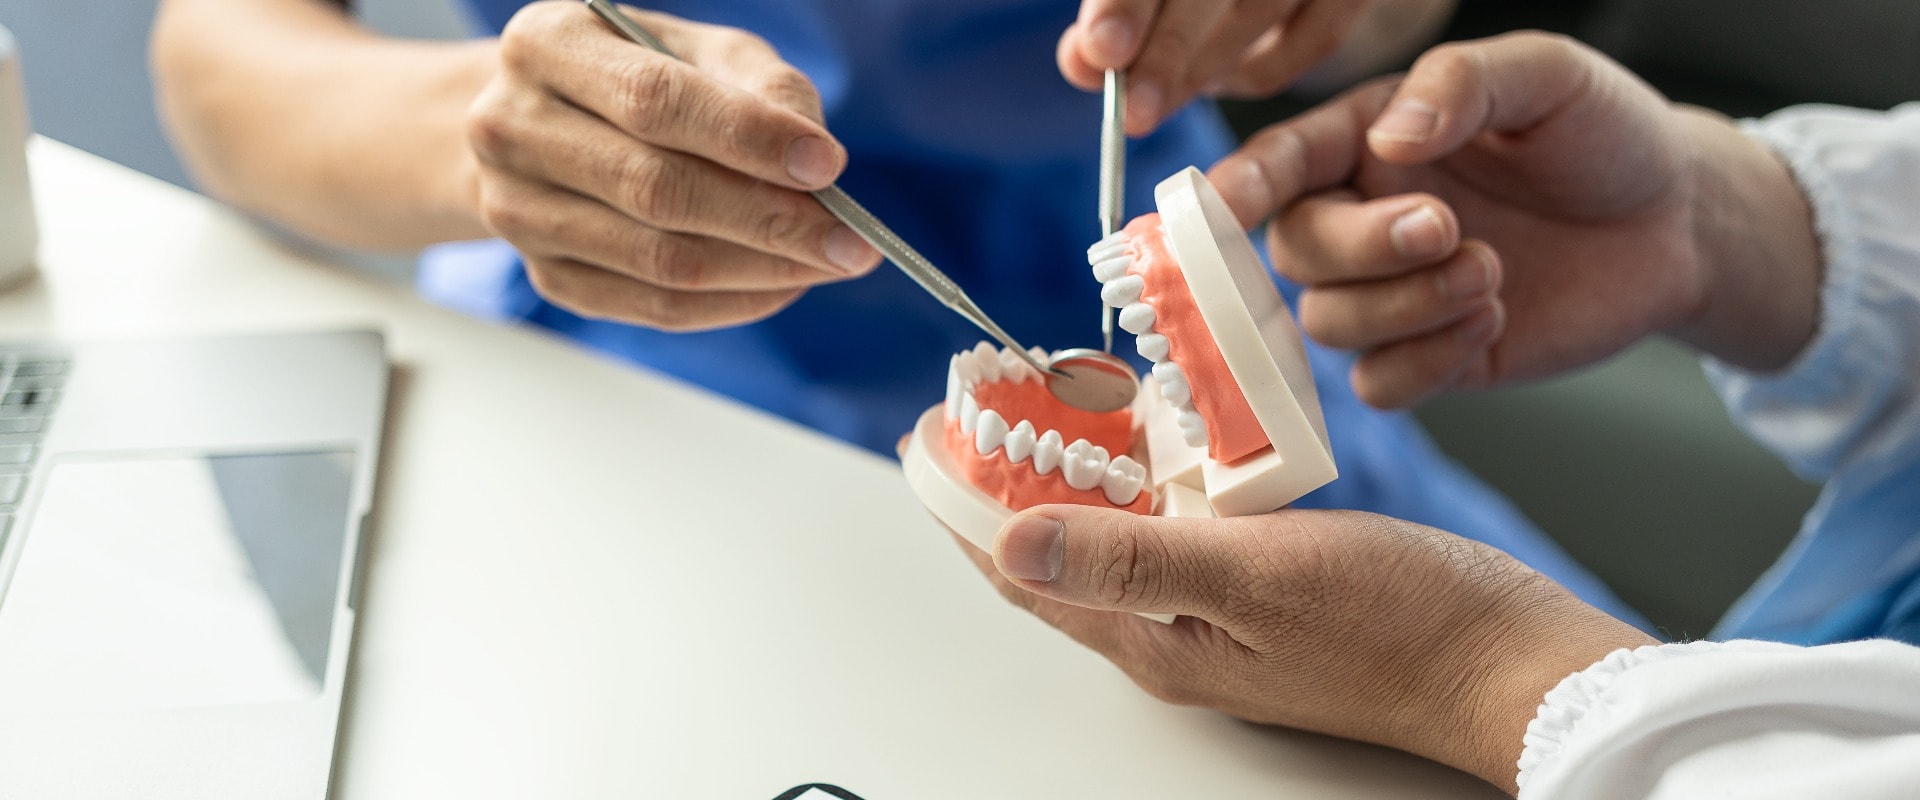 consult a dentist at the dental clinic office The dentist holds a model of the tooth for examination and research.